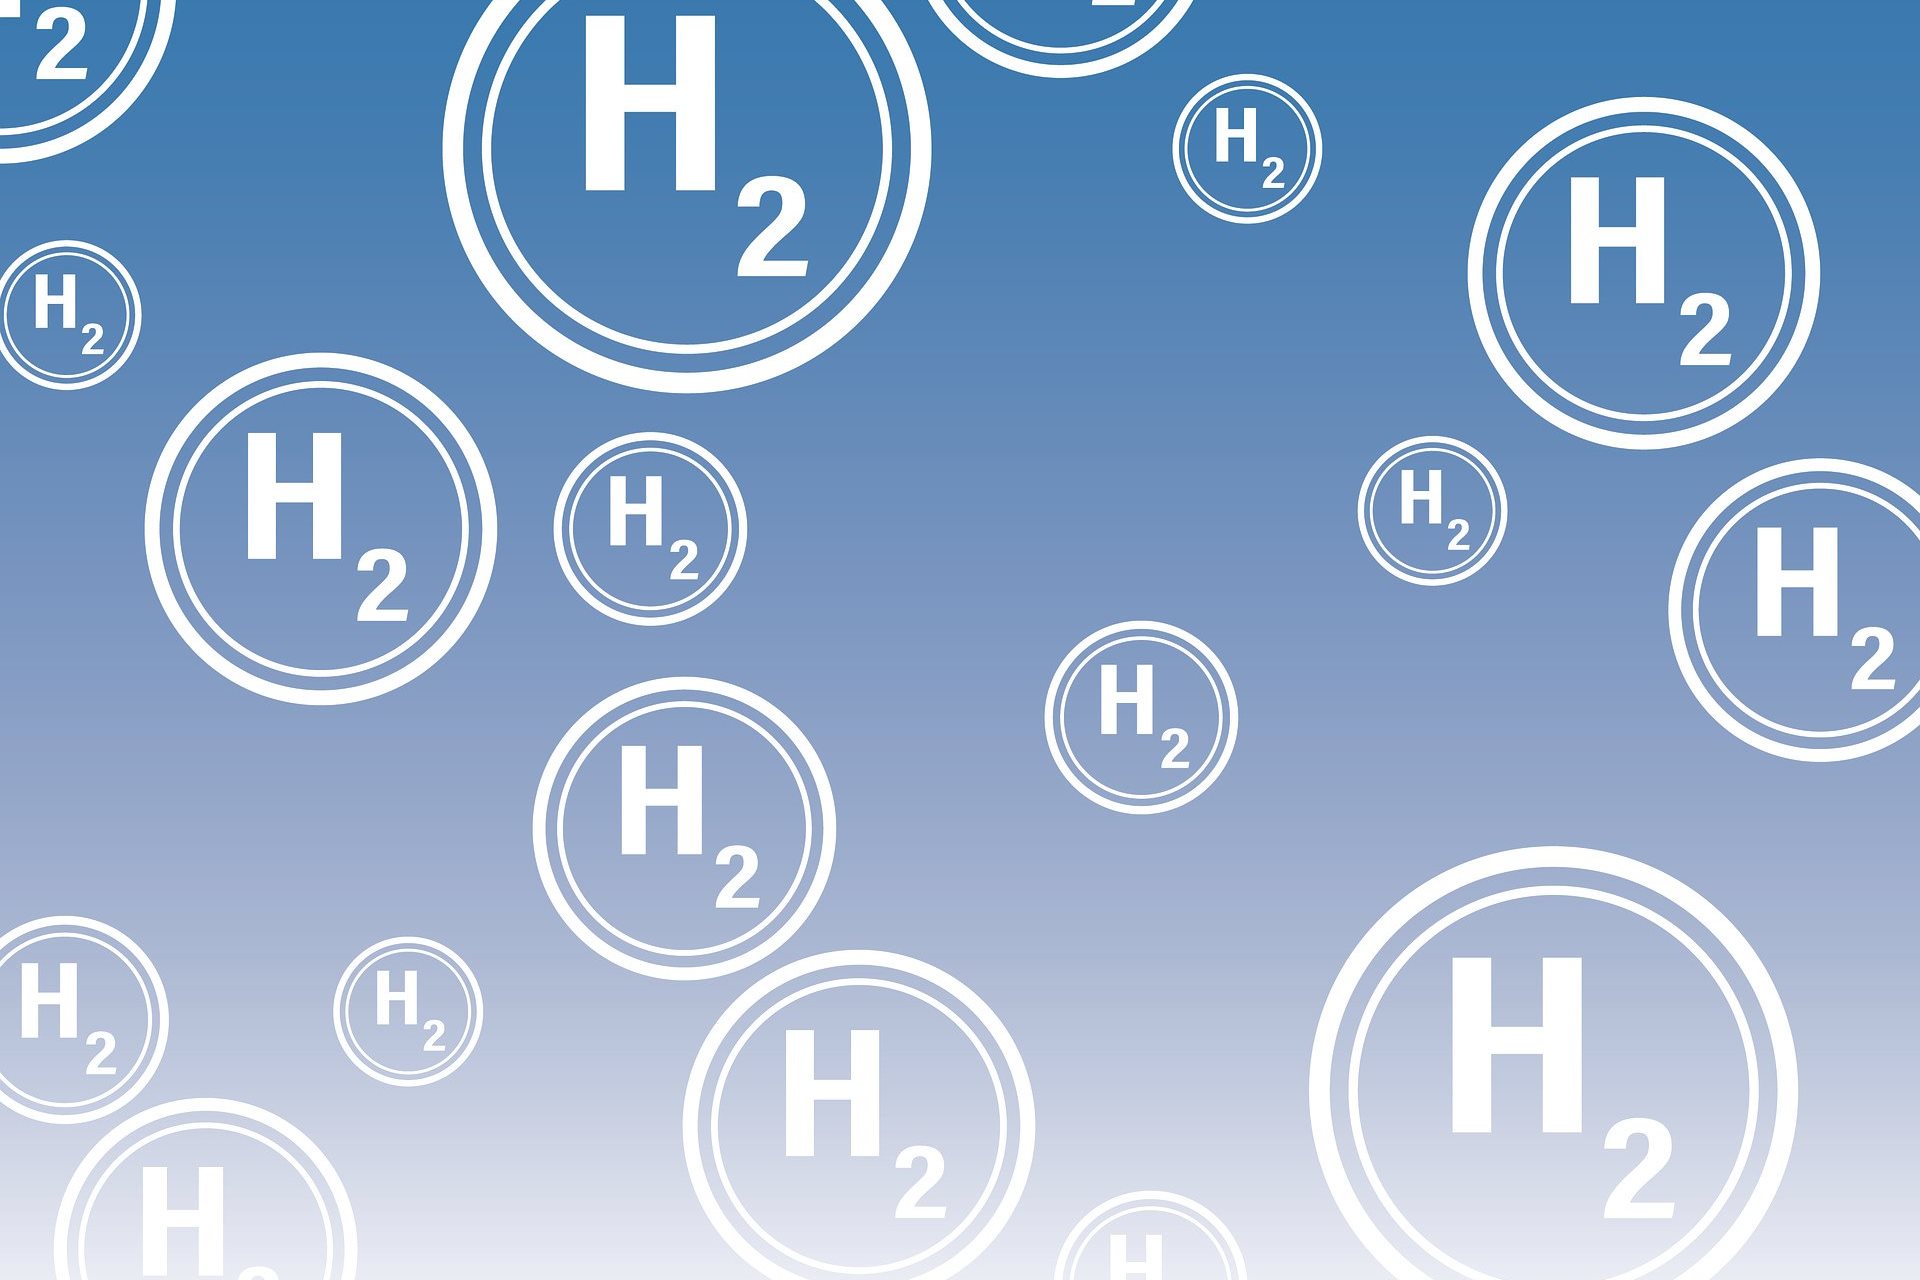 Bubbles containing the chemical symbol for Hydrogen